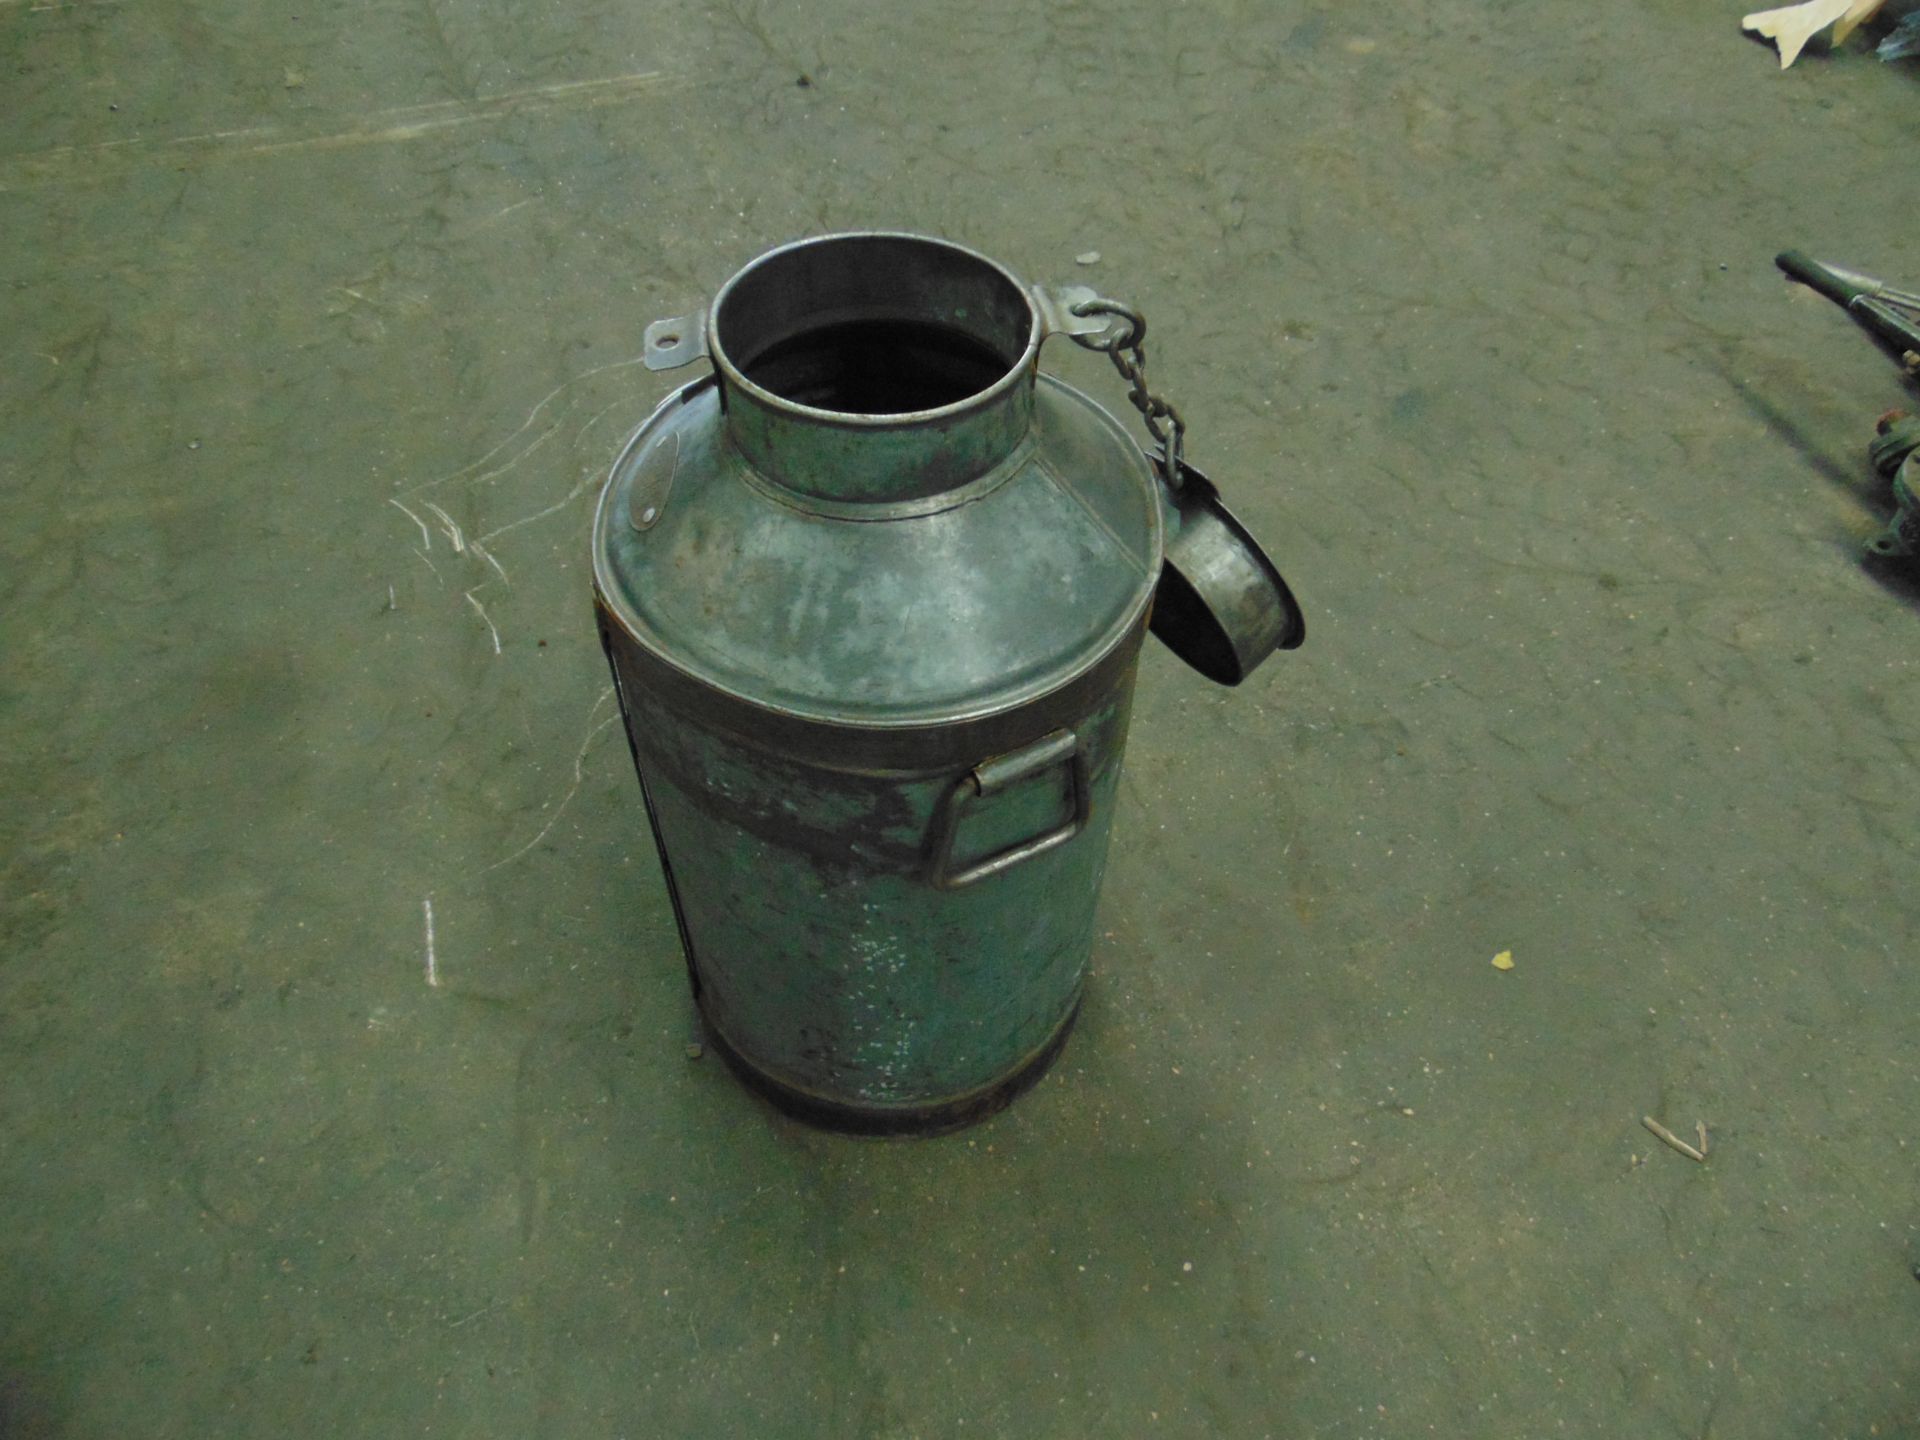 Antique Milk Churn as shown - Image 2 of 2